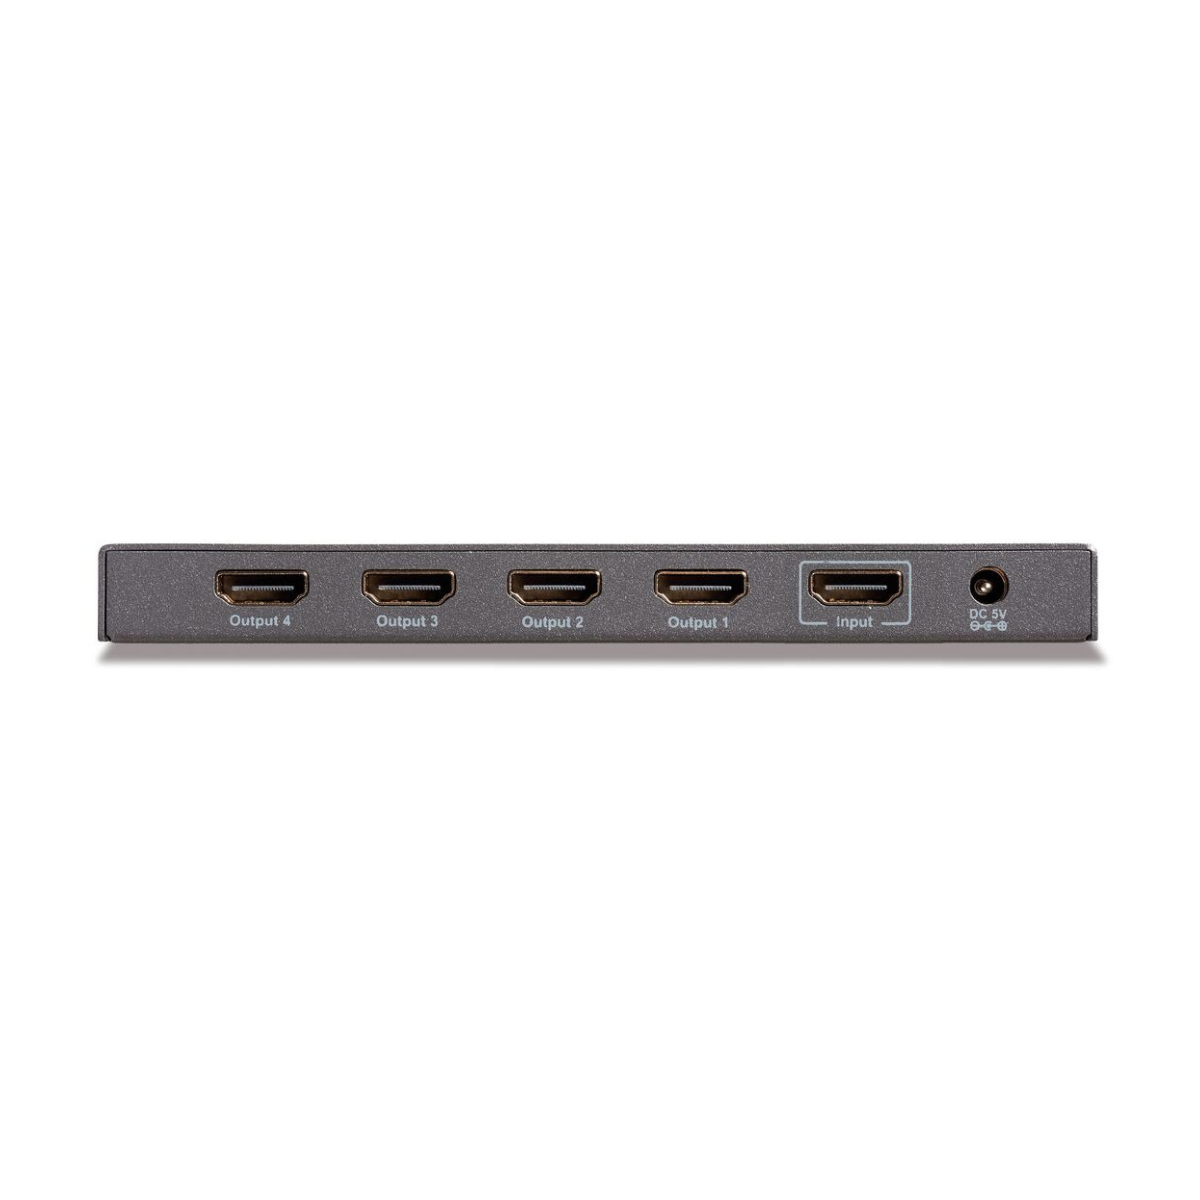 Split 614 UHD 2.0 - HDMI splitter 1 in / 4 out - Connections Image with 1 HDMI in and 4 HDMI out ports | Marmitek